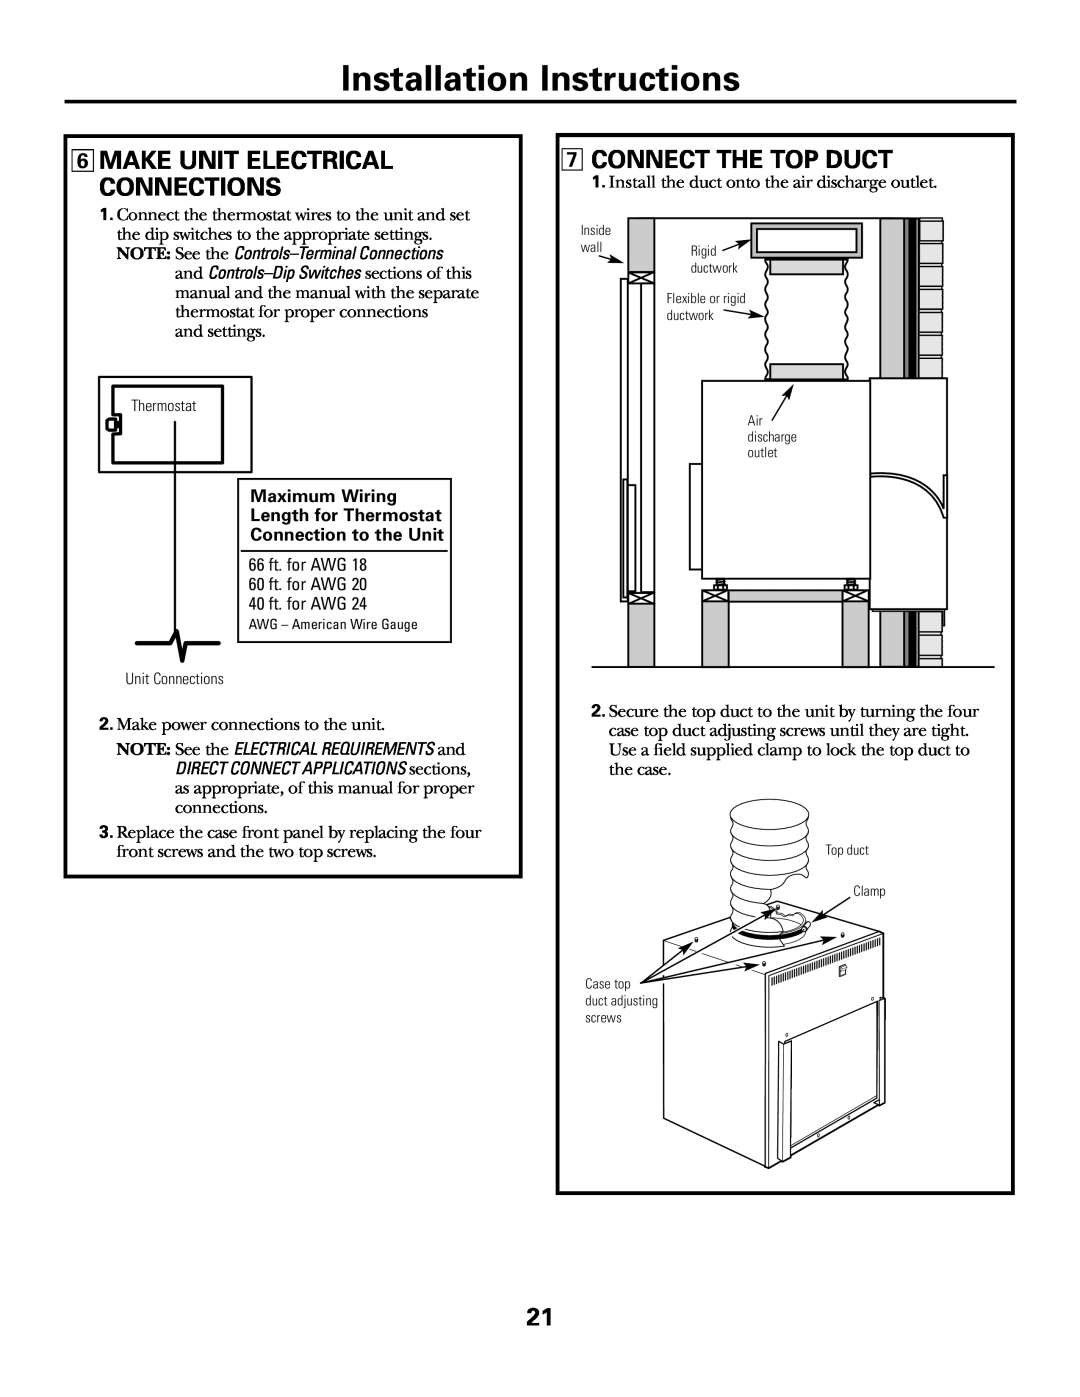 GE 49-7419-2 7CONNECT THE TOP DUCT, 6MAKE UNIT ELECTRICAL CONNECTIONS, Installation Instructions, Connection to the Unit 